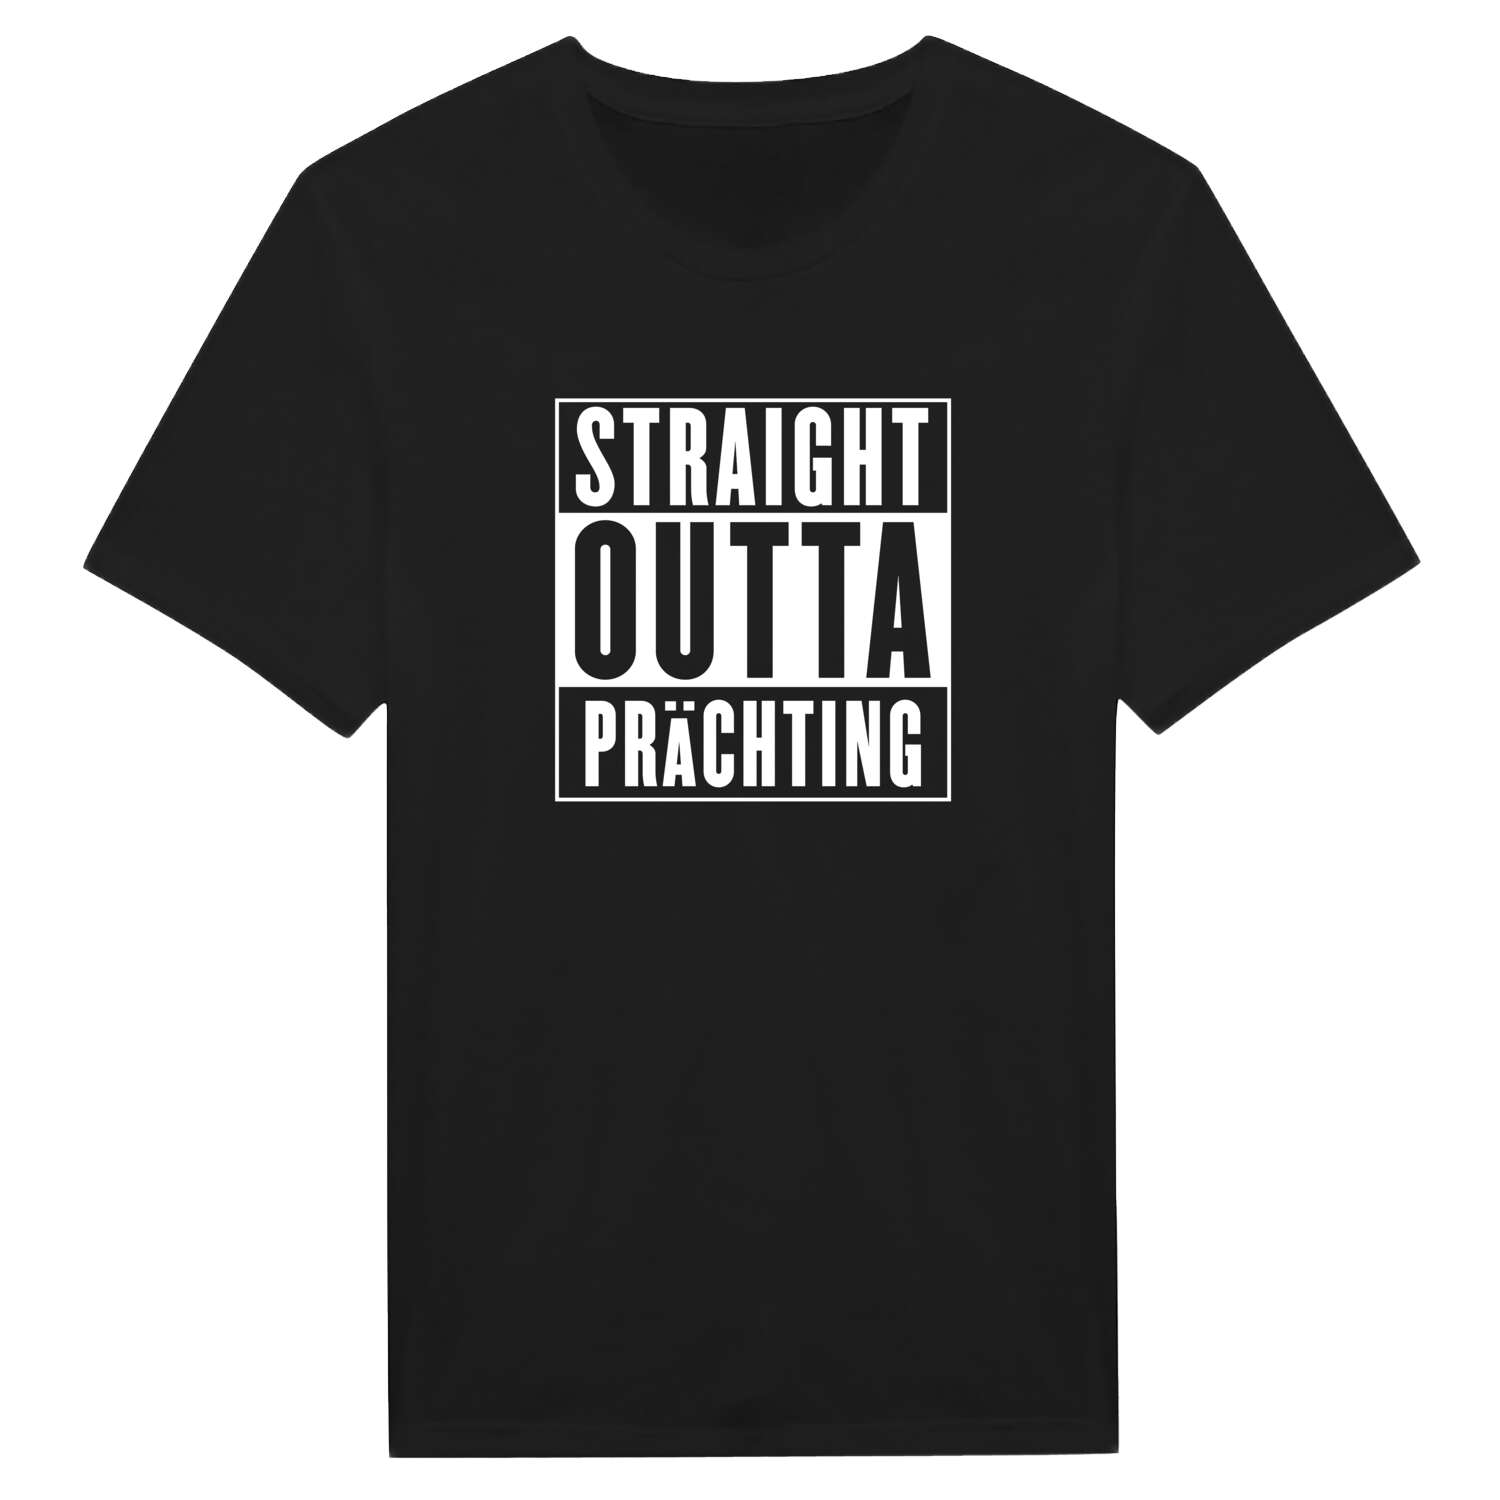 Prächting T-Shirt »Straight Outta«